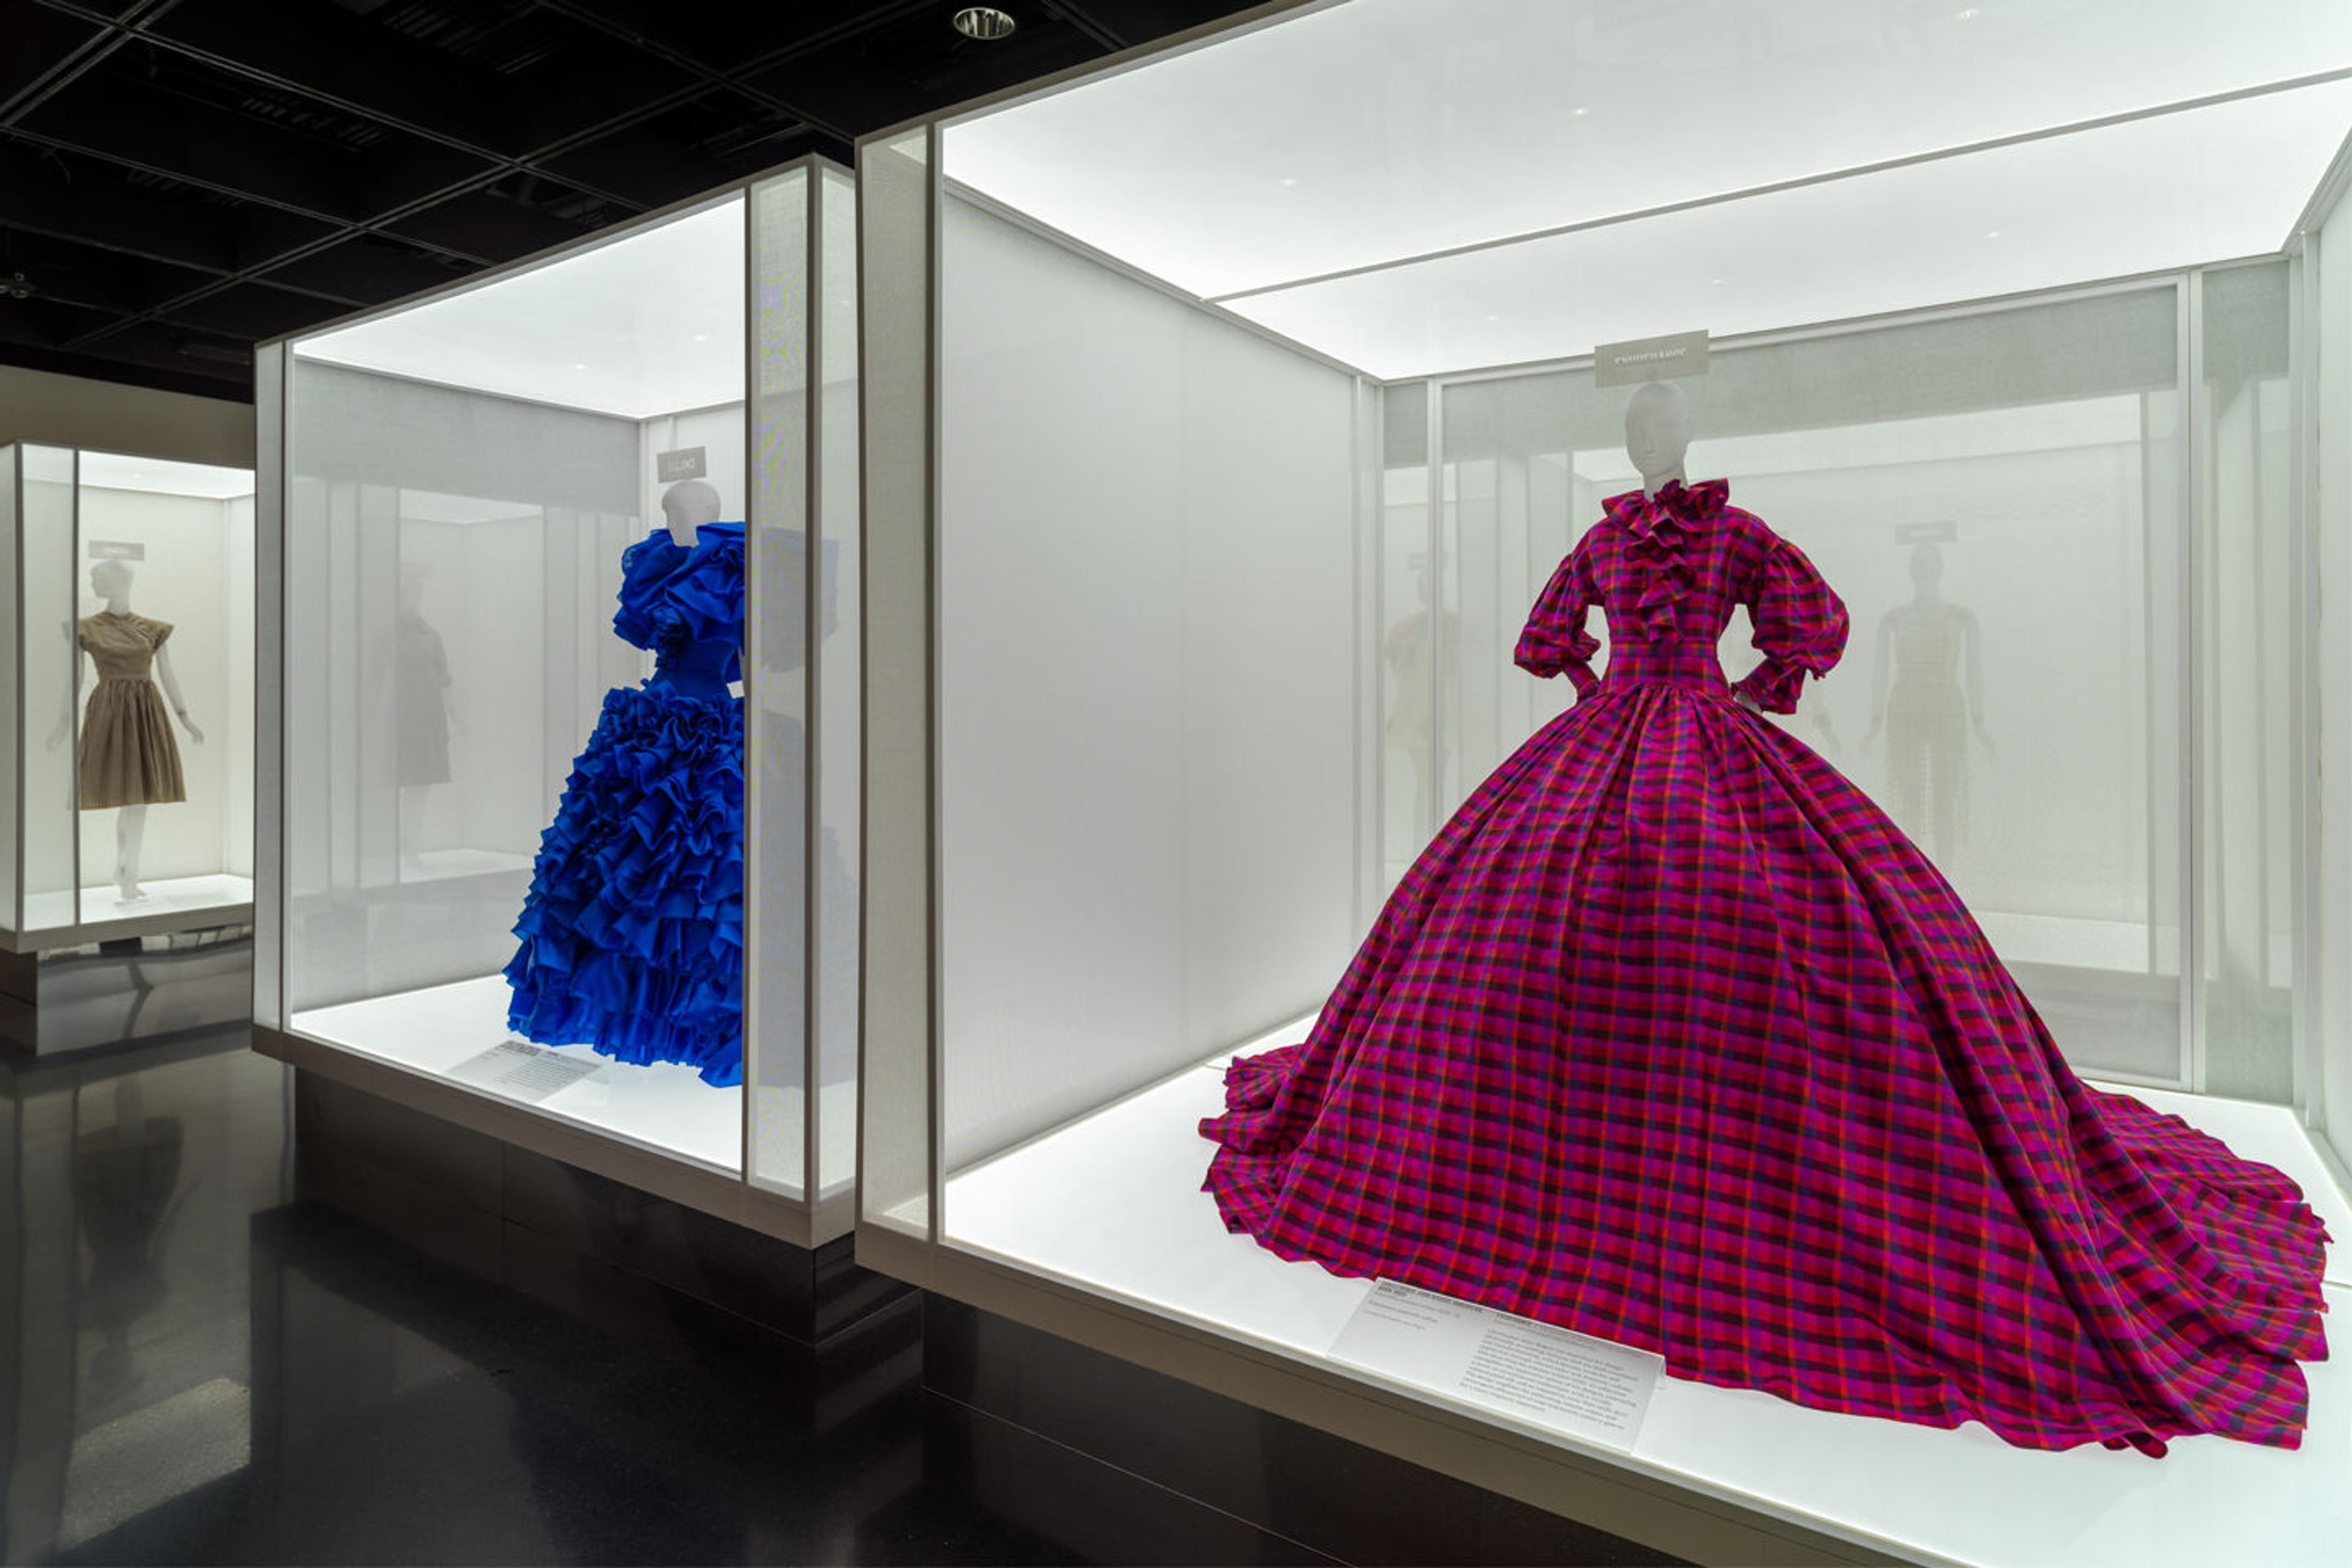 An in-gallery view of dresses presented in illuminated light box cases; the dress appearing closest in the foreground has a bight fuchsia tartan pattern with long sleeves, fitted bodice and large crinoline skirt.